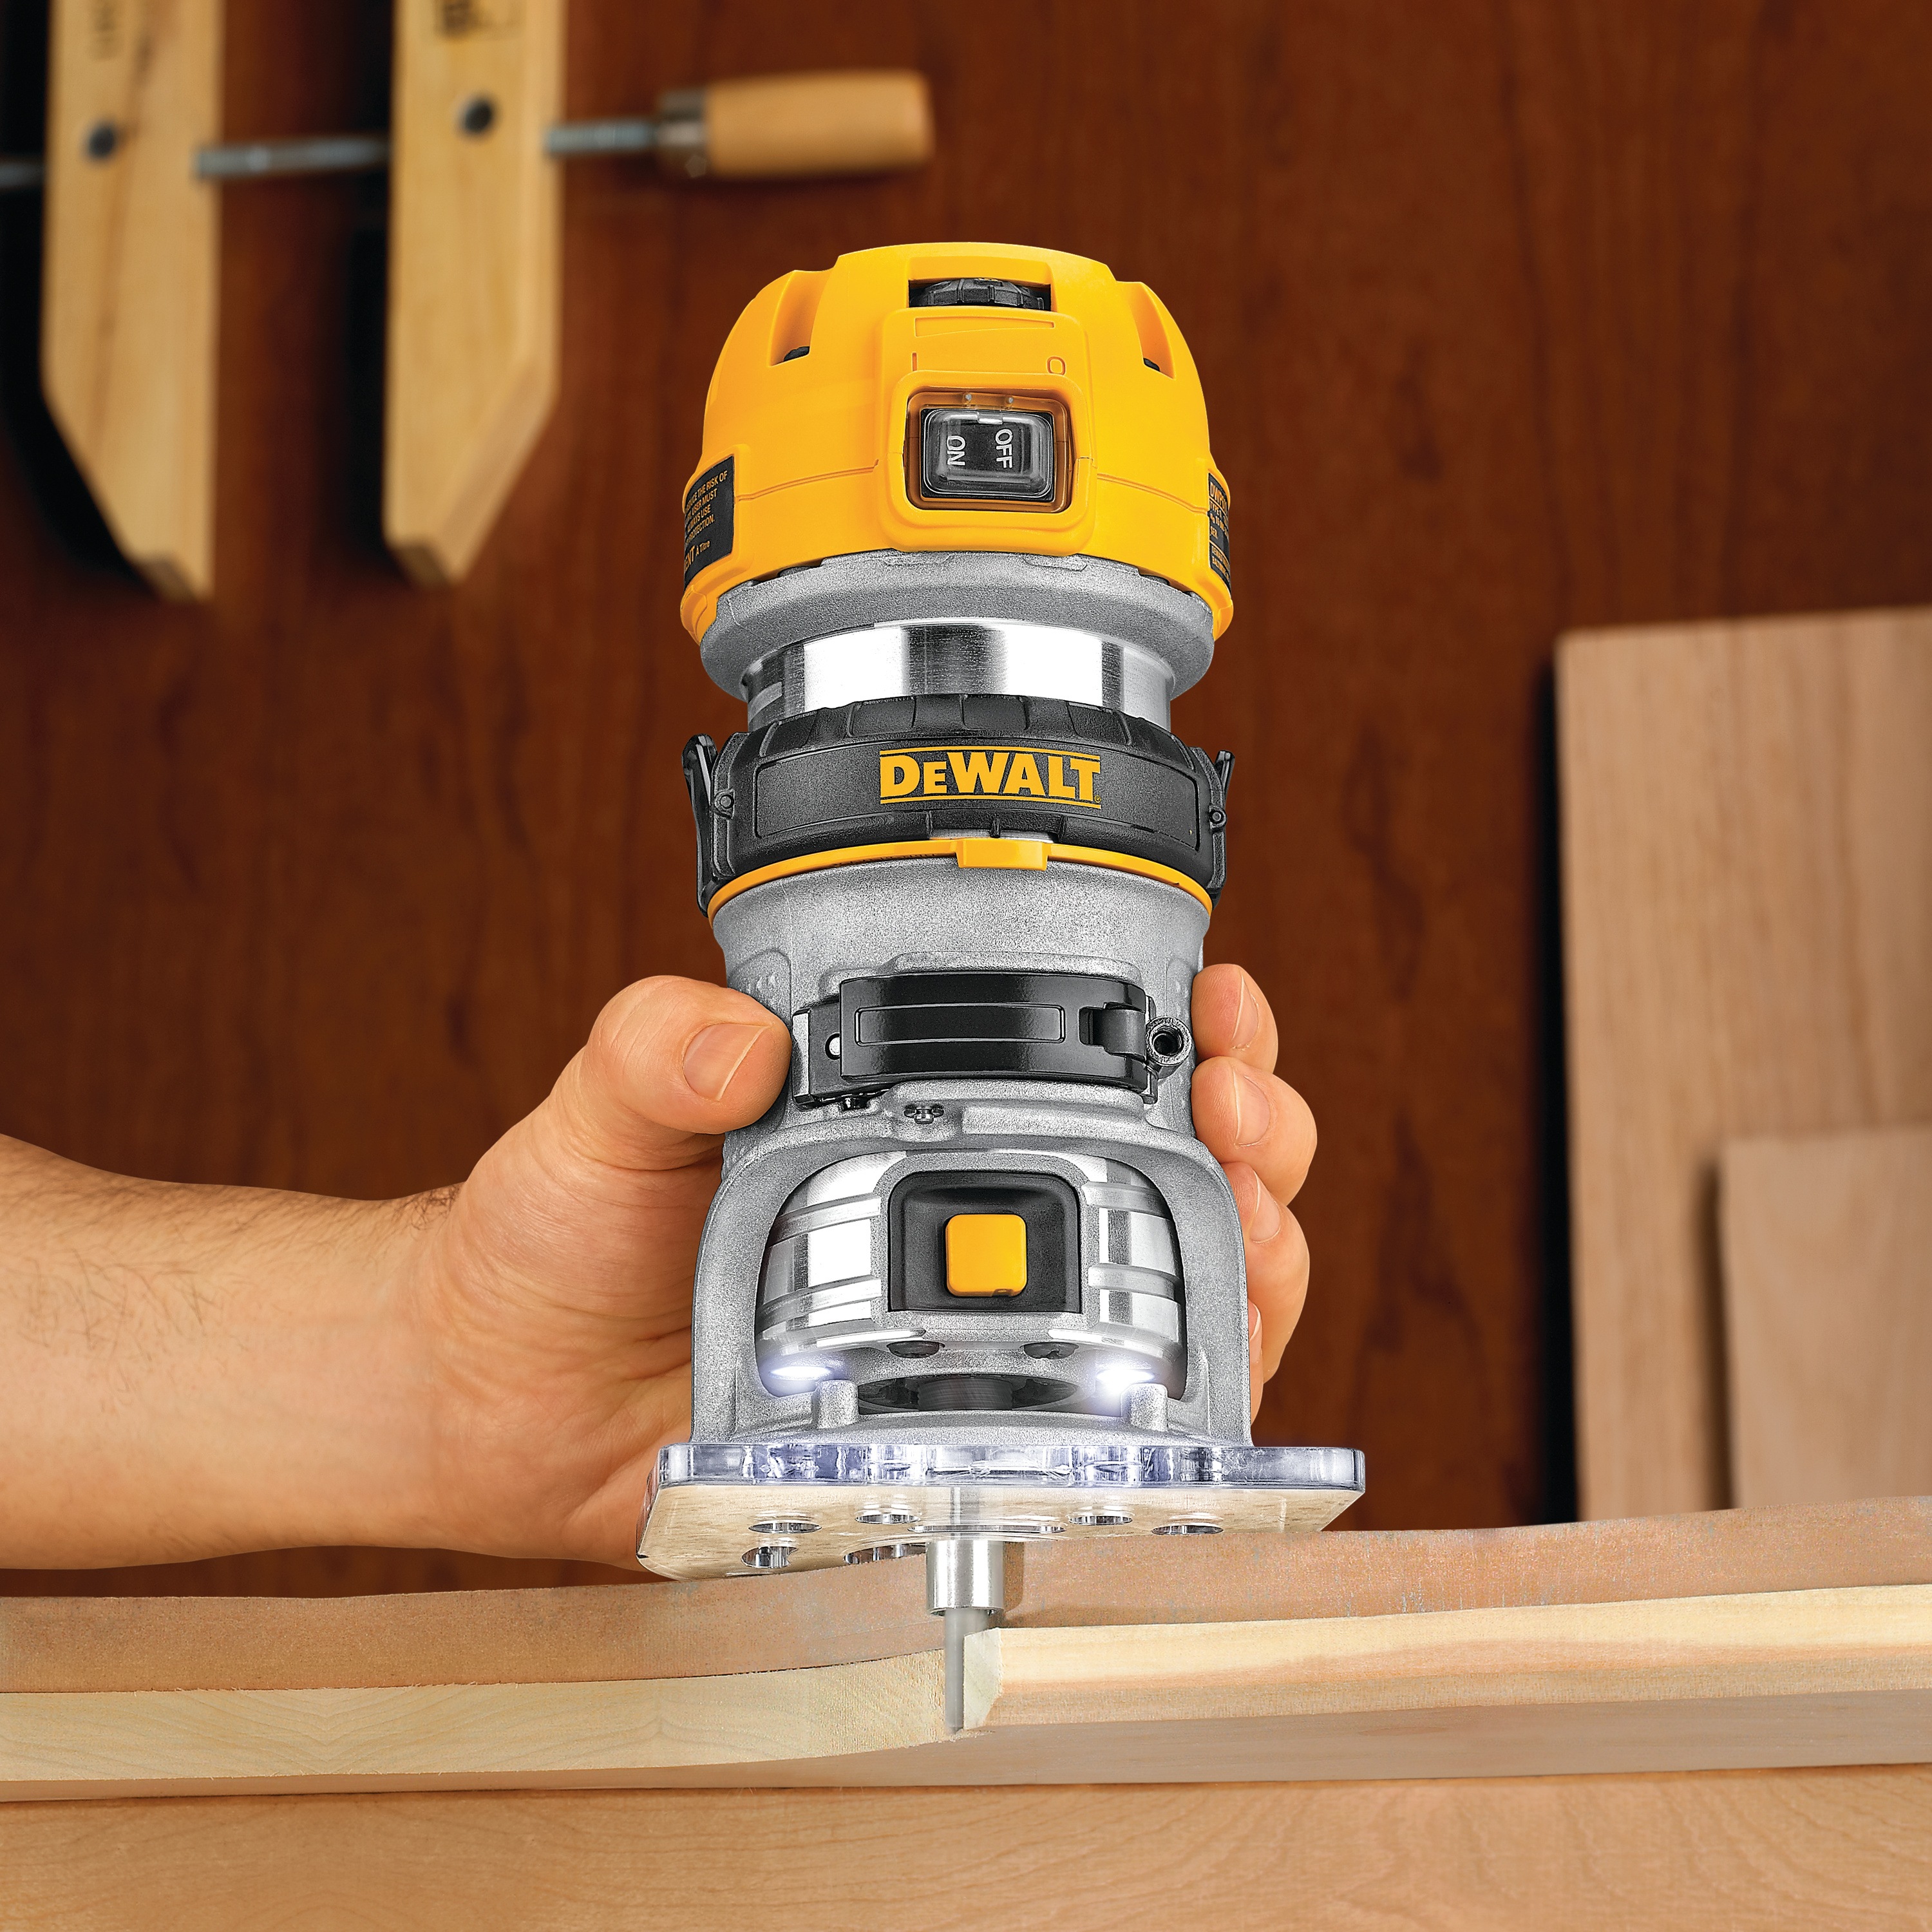 Max torque variable speed compact router being used to cut wood.